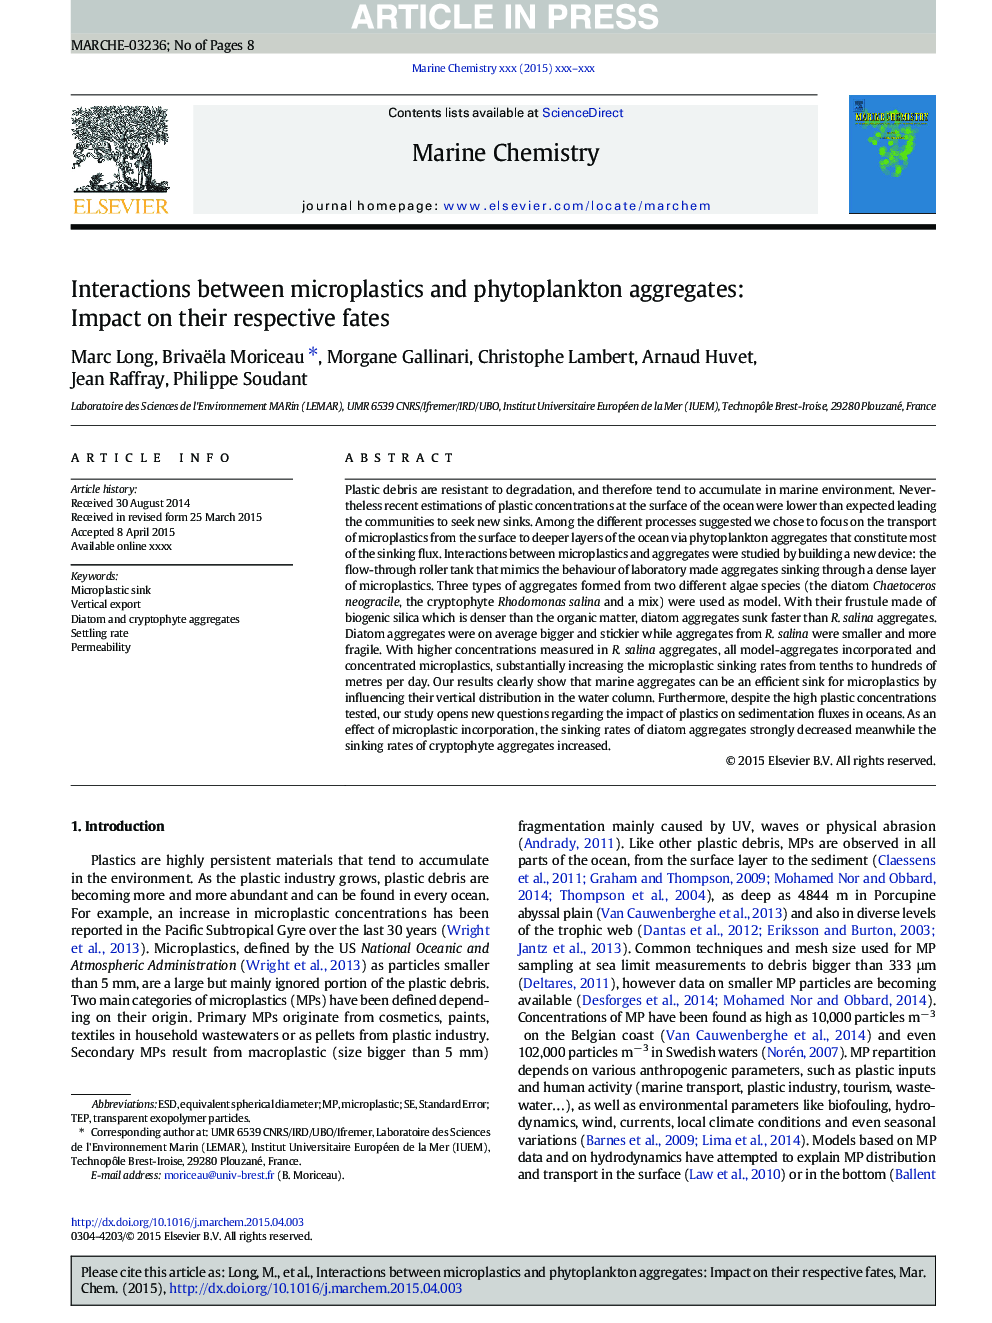 Interactions between microplastics and phytoplankton aggregates: Impact on their respective fates